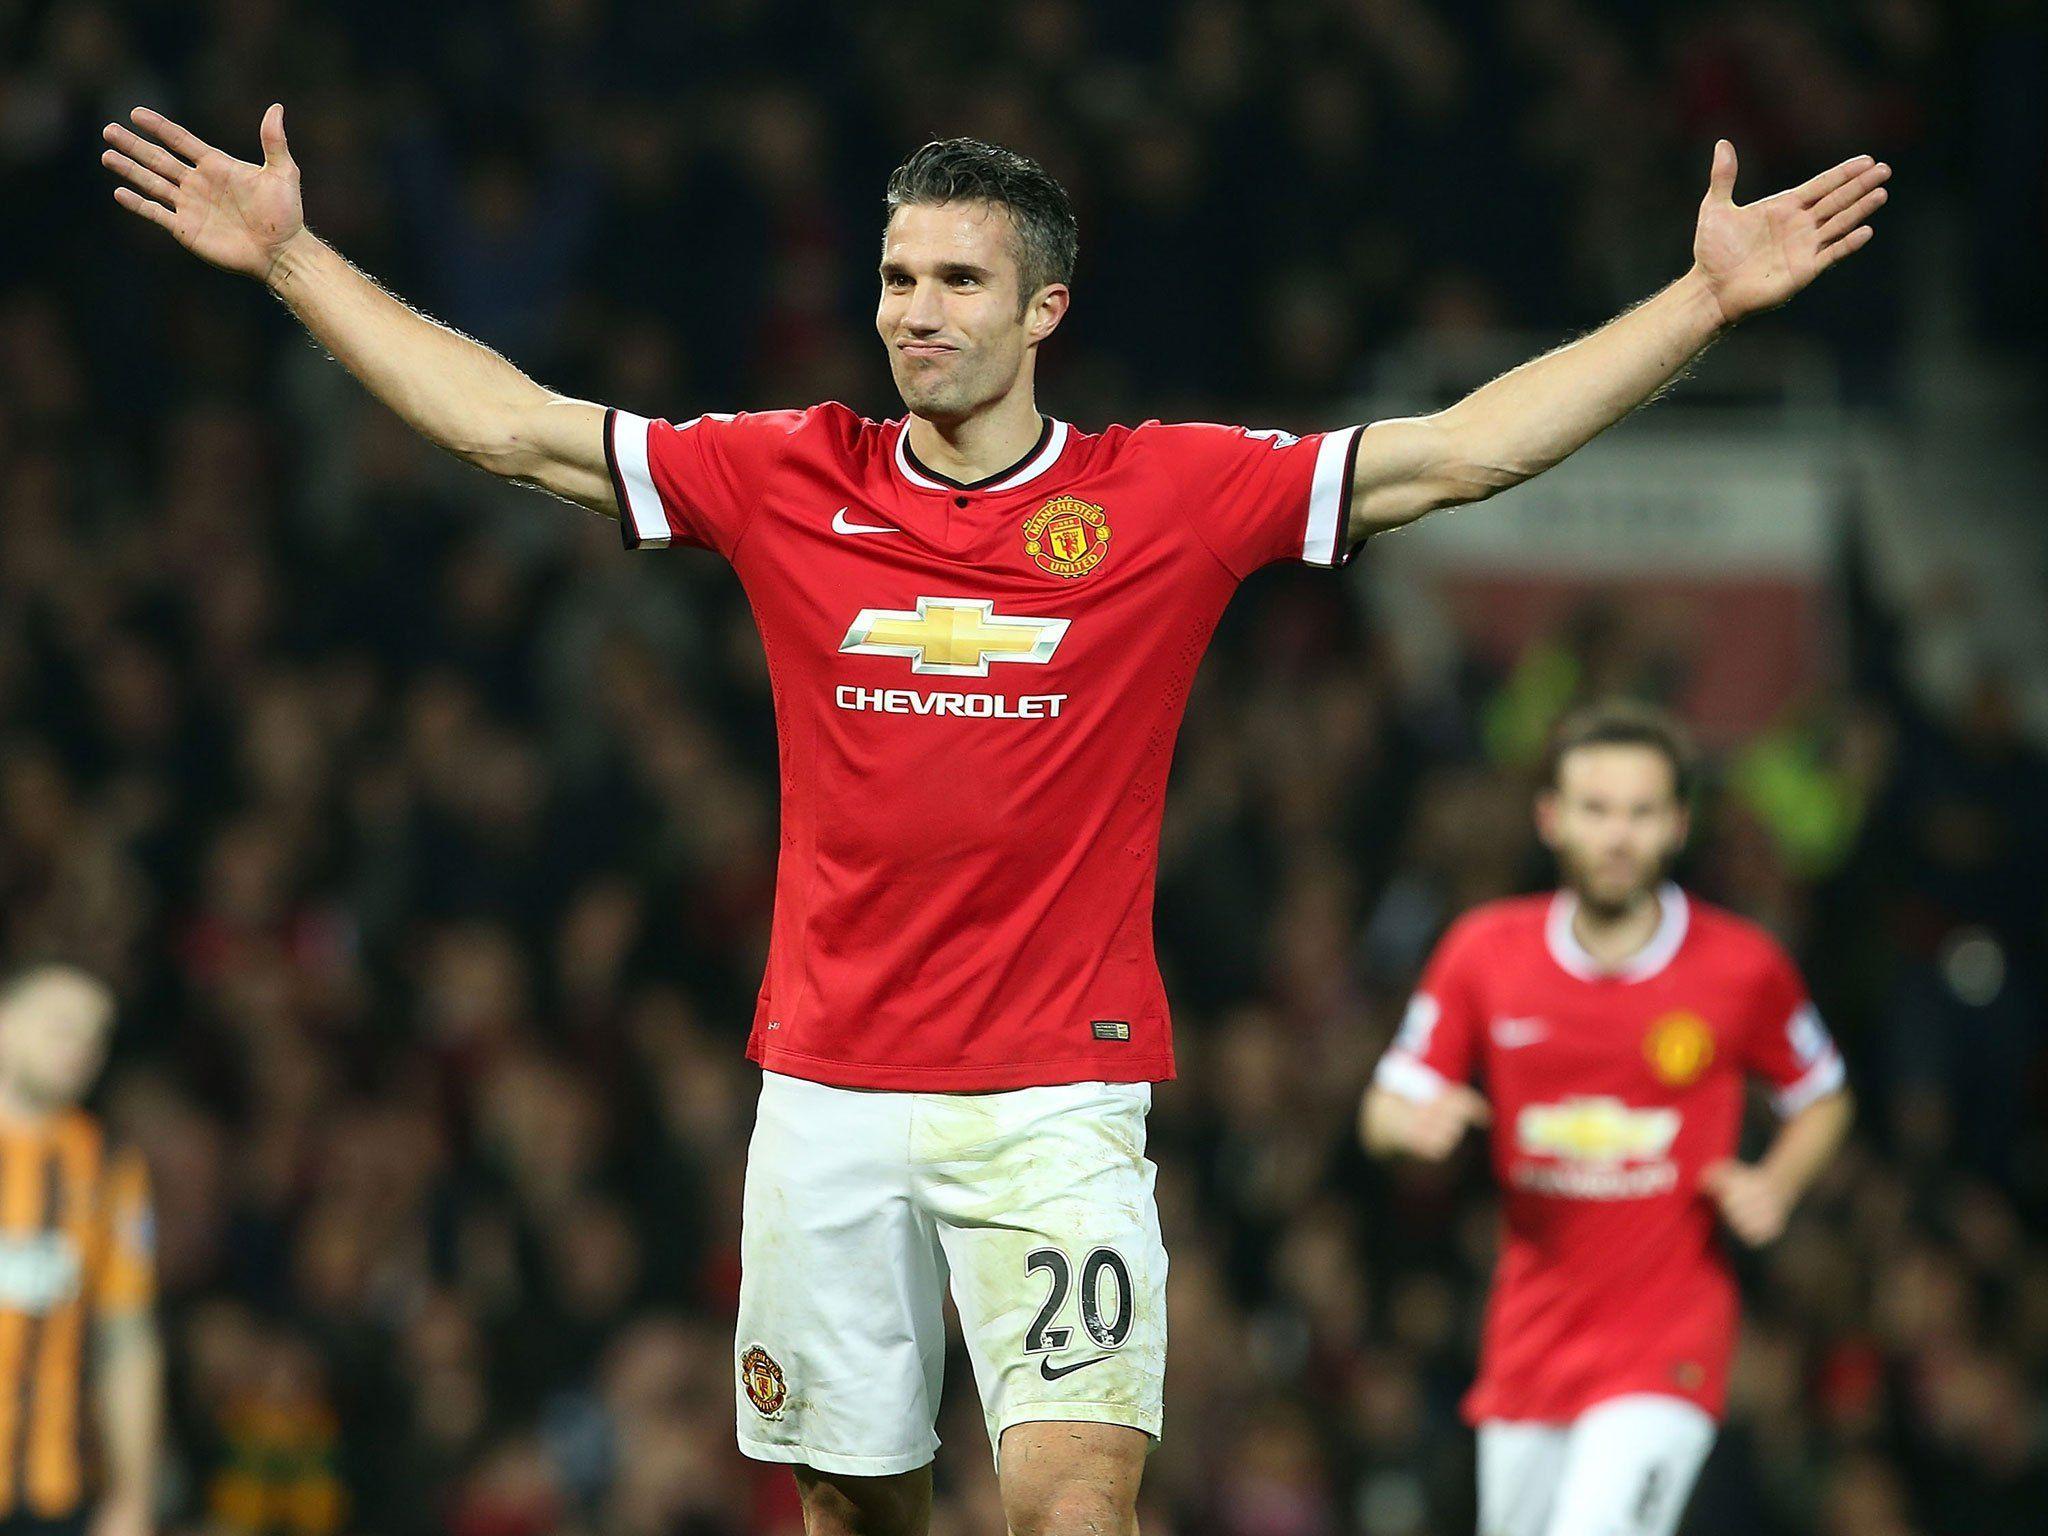 UEFA EUROPA LEAGUE DRAW Robin Vanpersie To Face his former Club